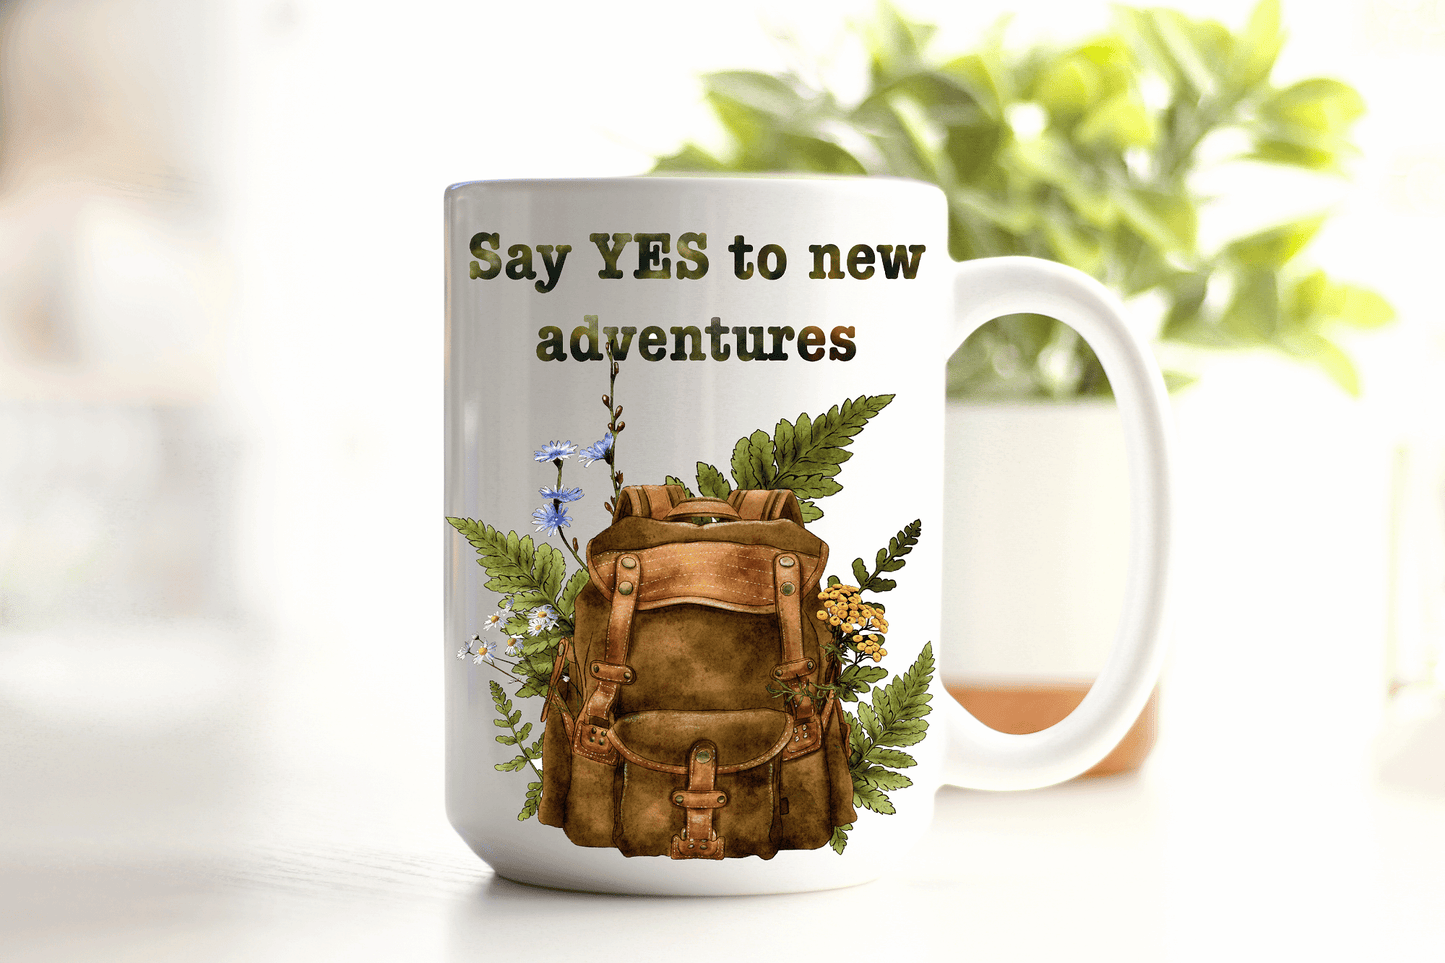  Say Yes To New Adventures Mug by Free Spirit Accessories sold by Free Spirit Accessories